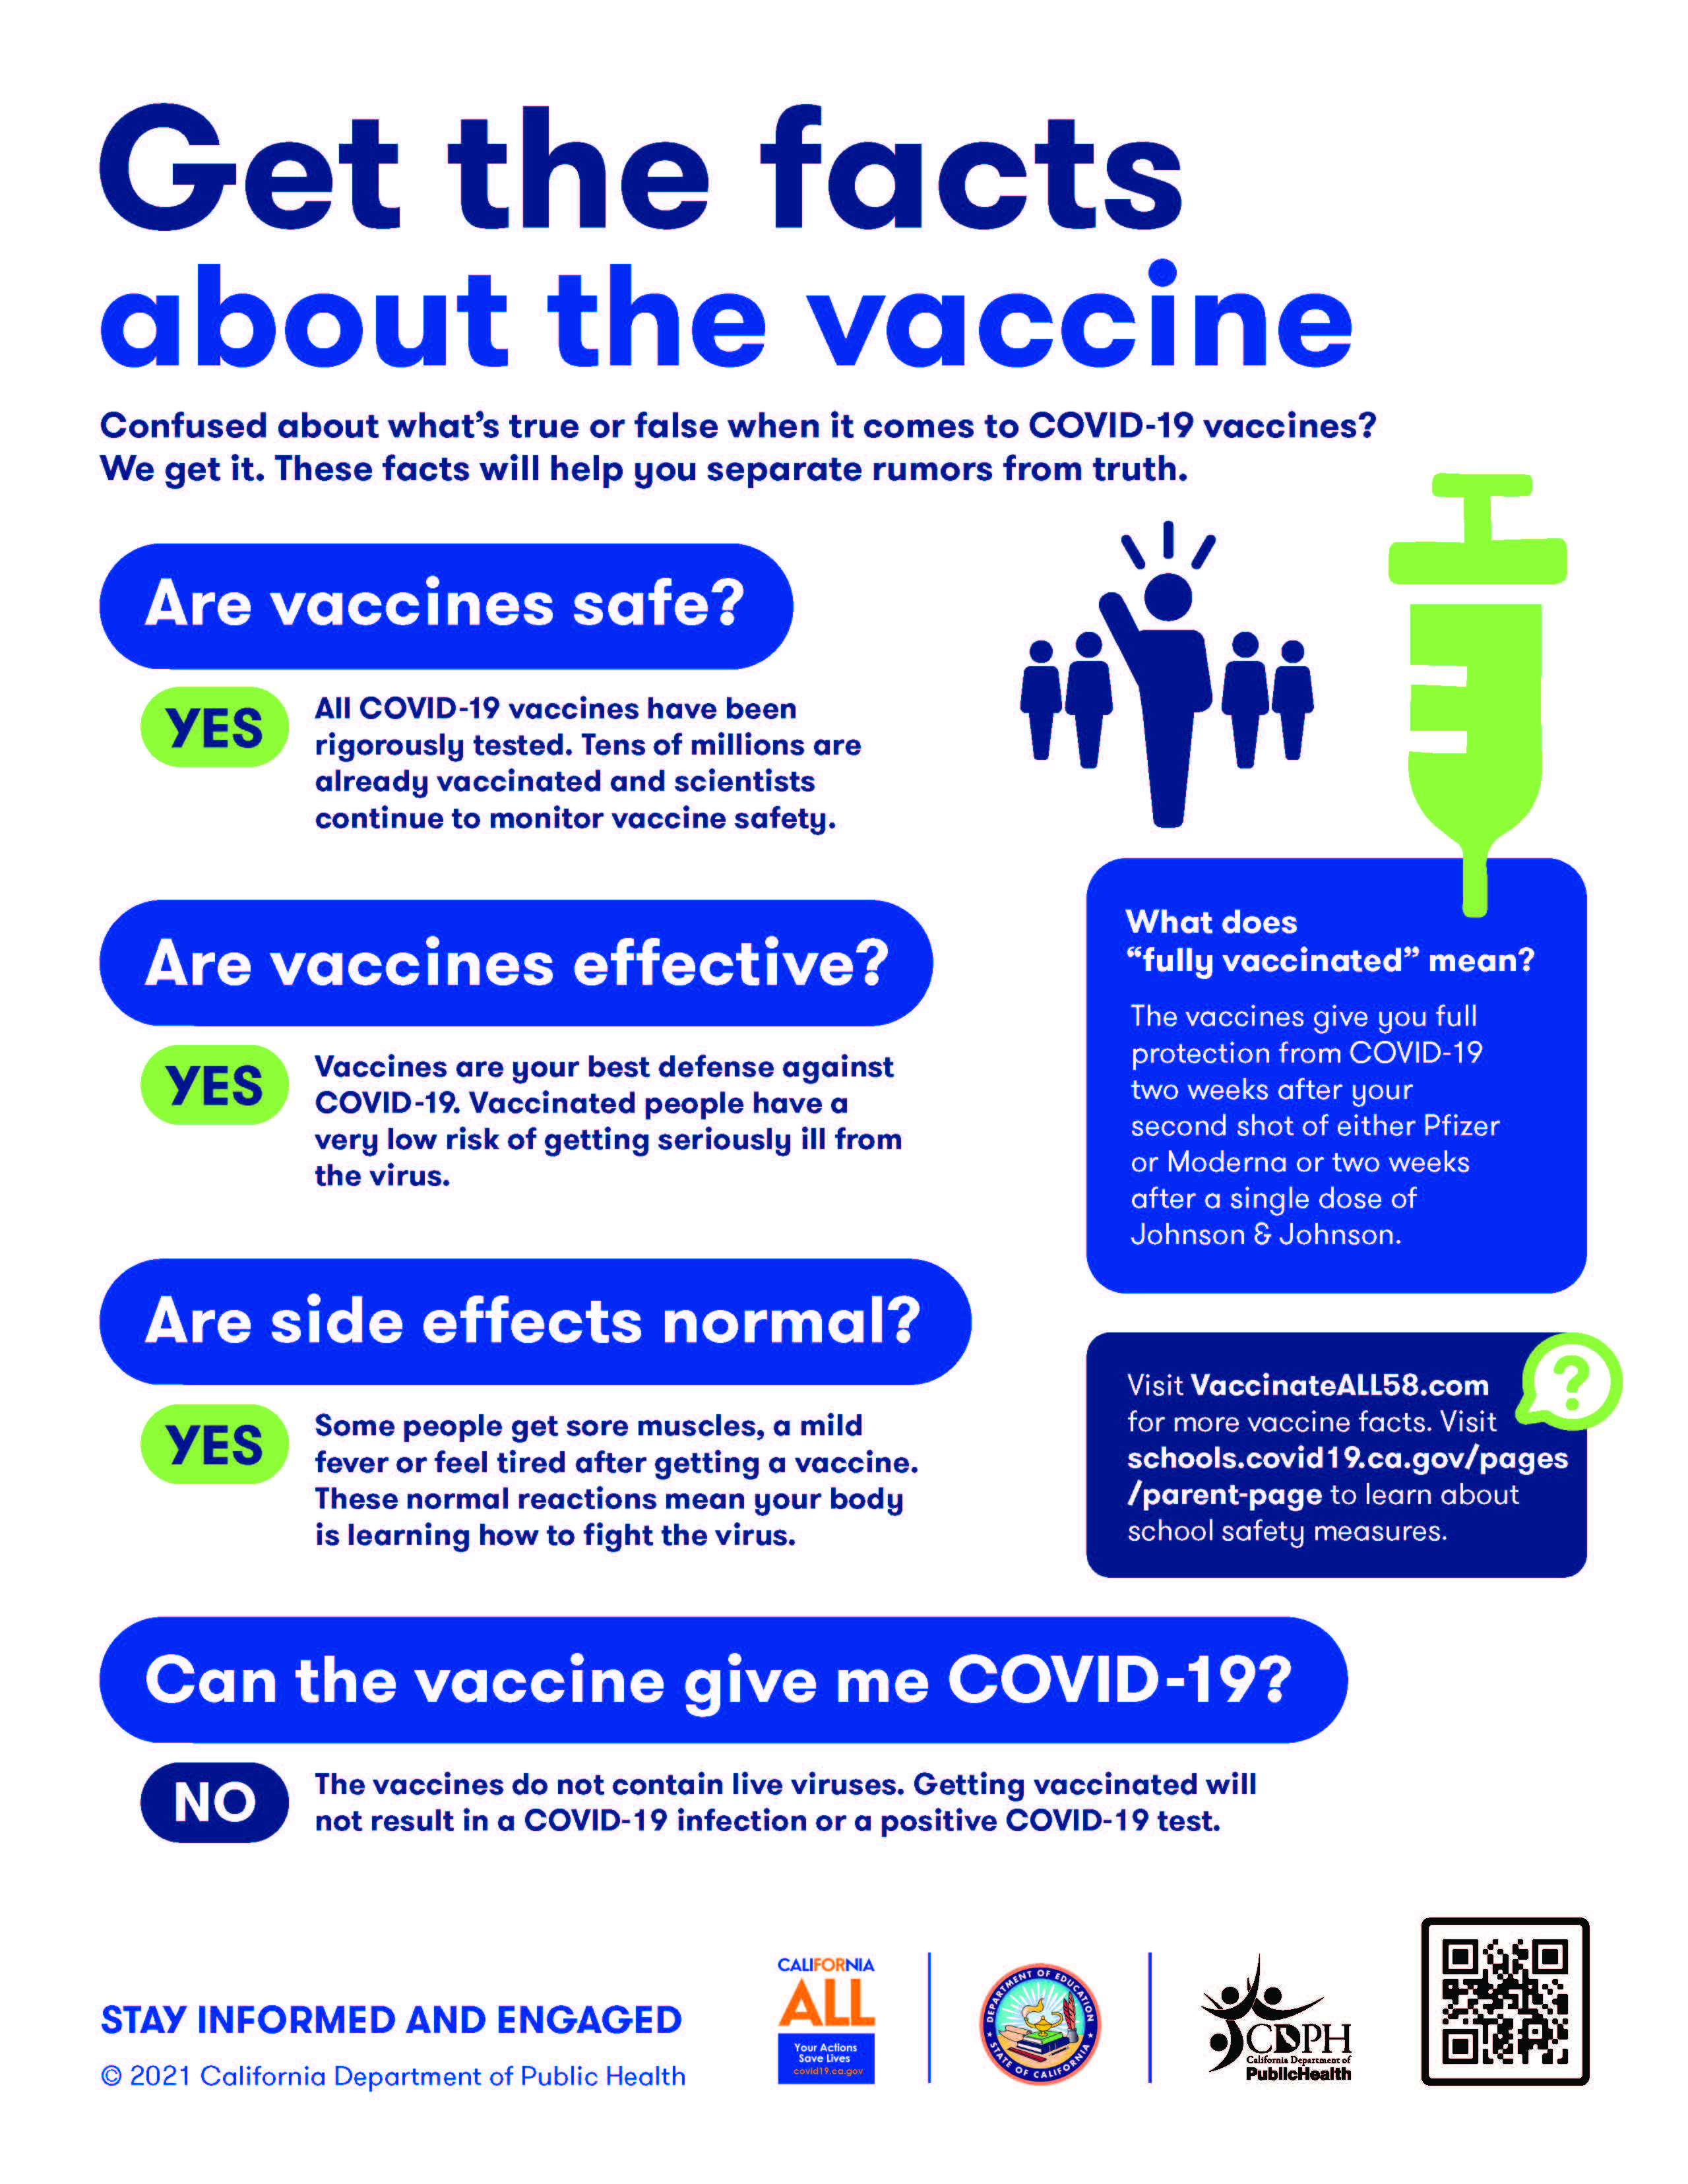 Get the facts about the vaccine. © 2021 California Department of Public Health